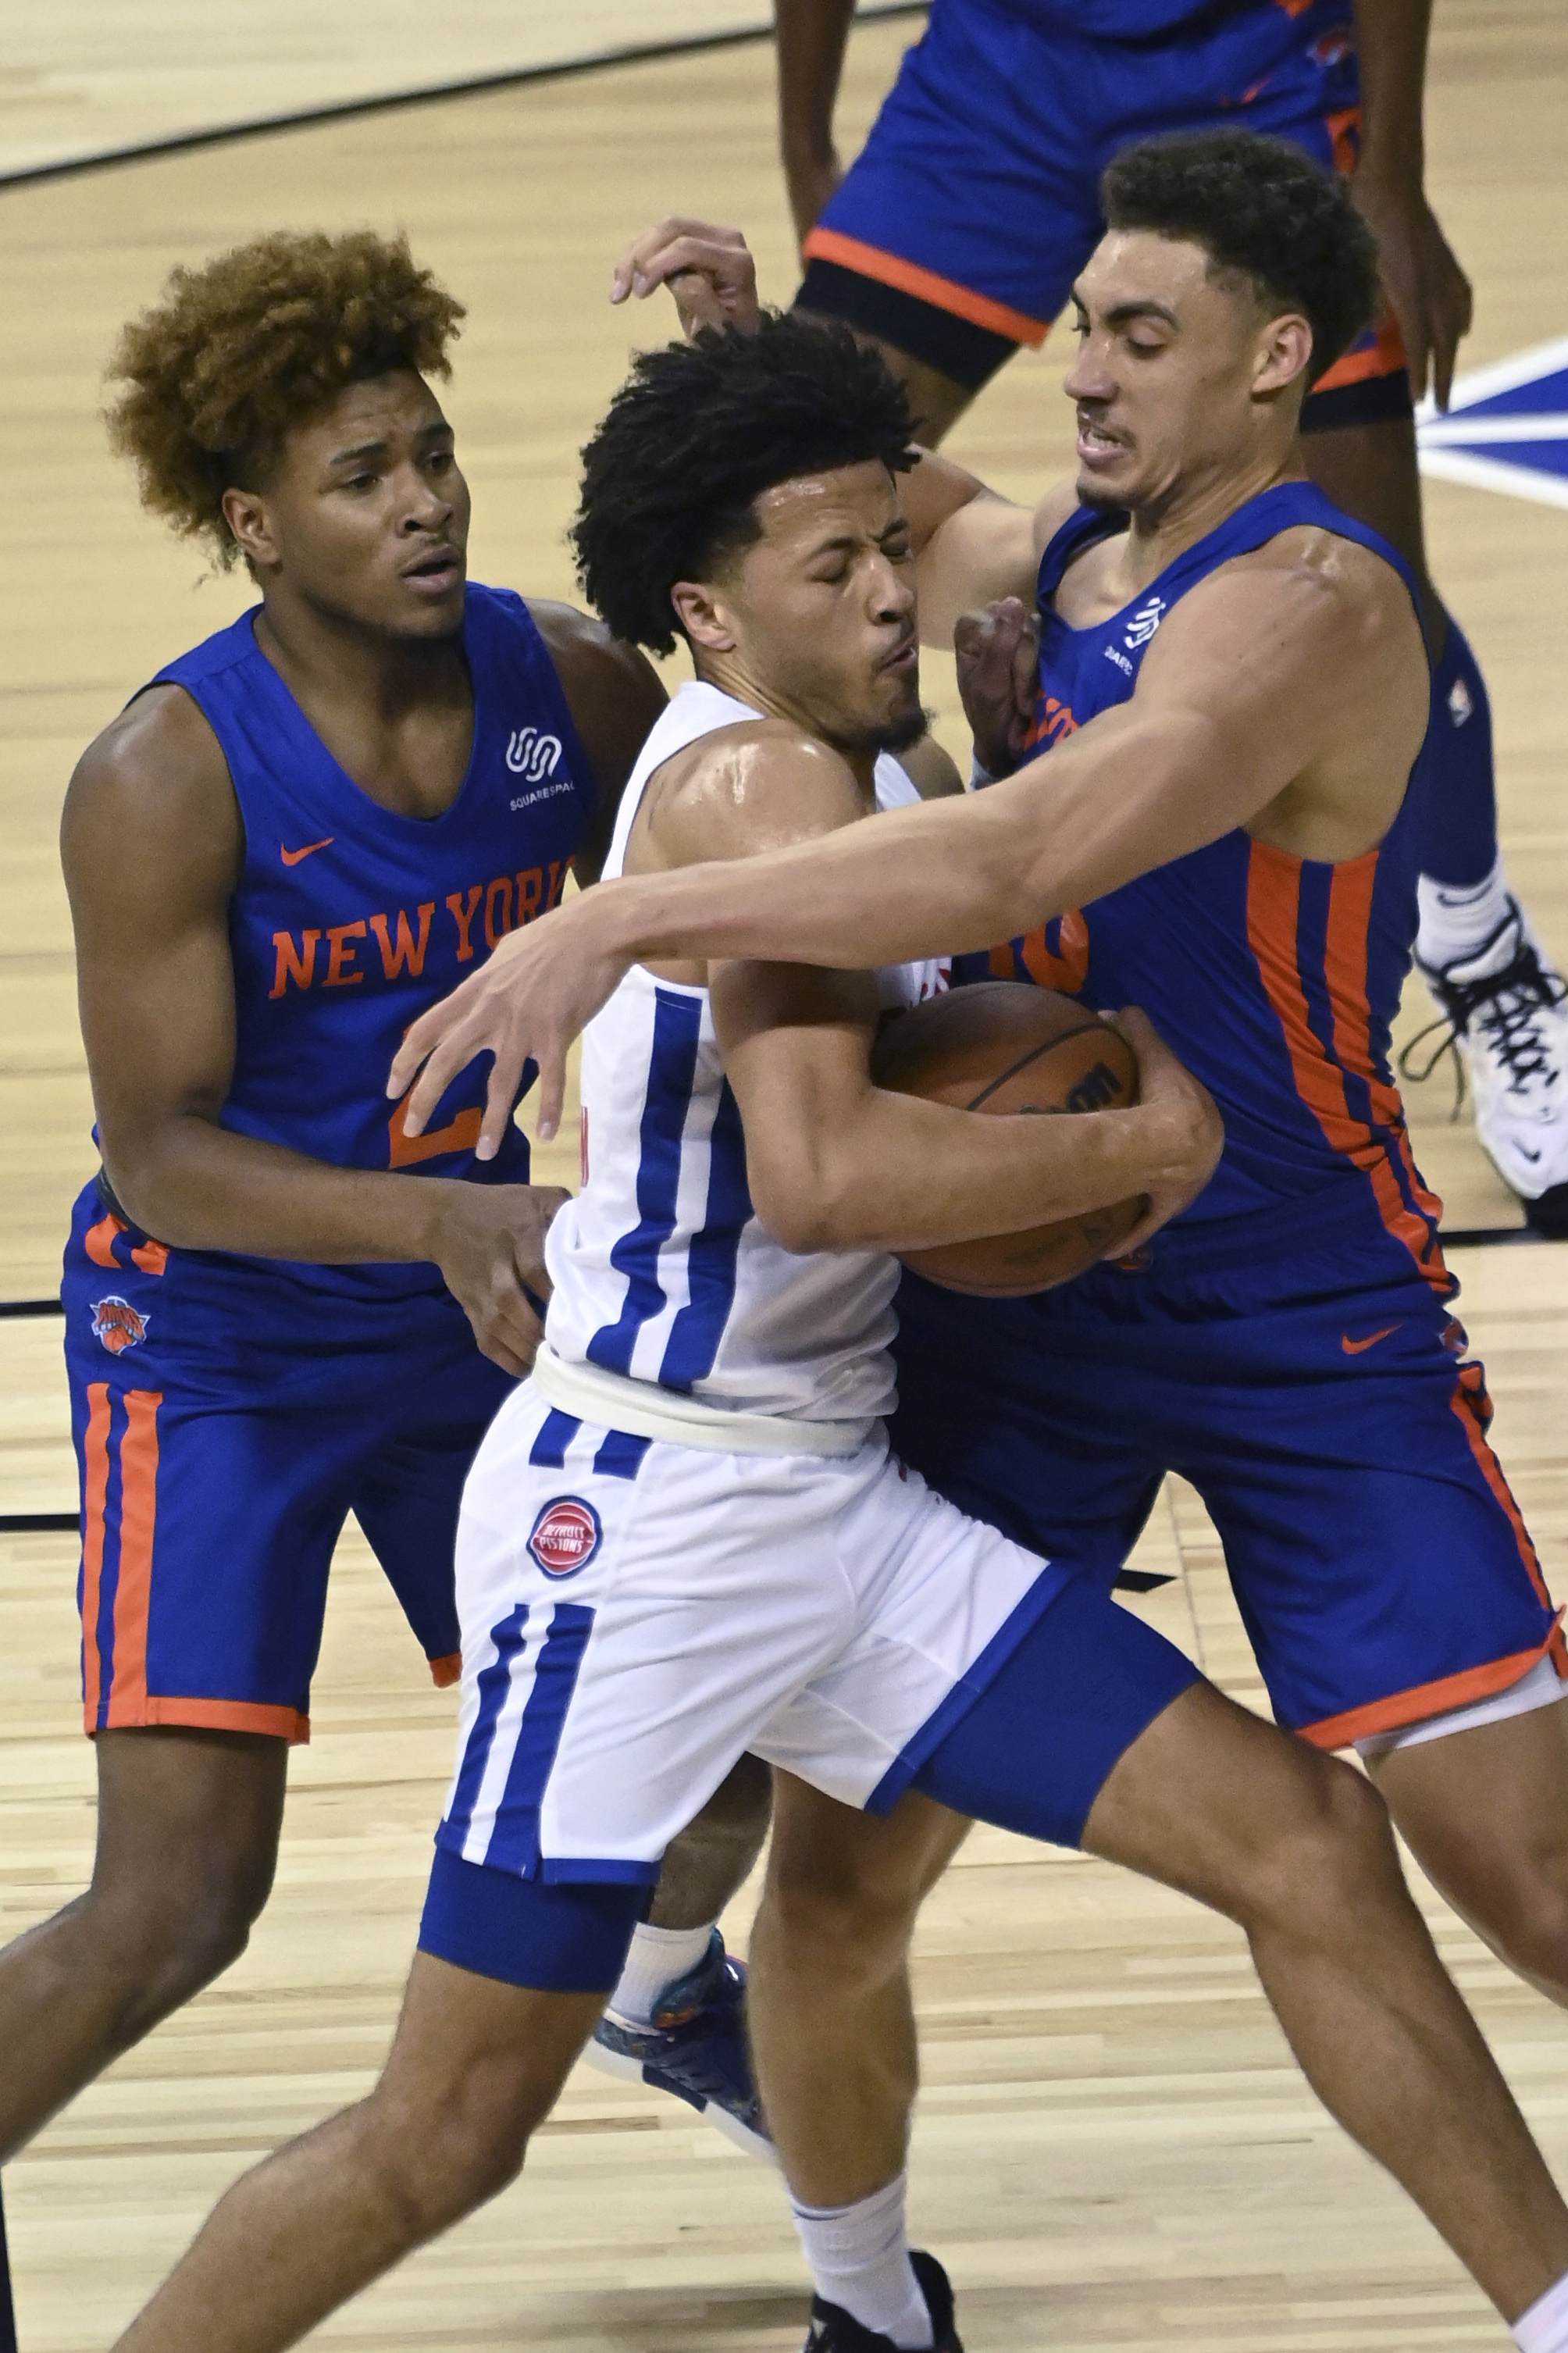 New York Knicks: Miles McBride Will Be the Steal of the NBA Draft